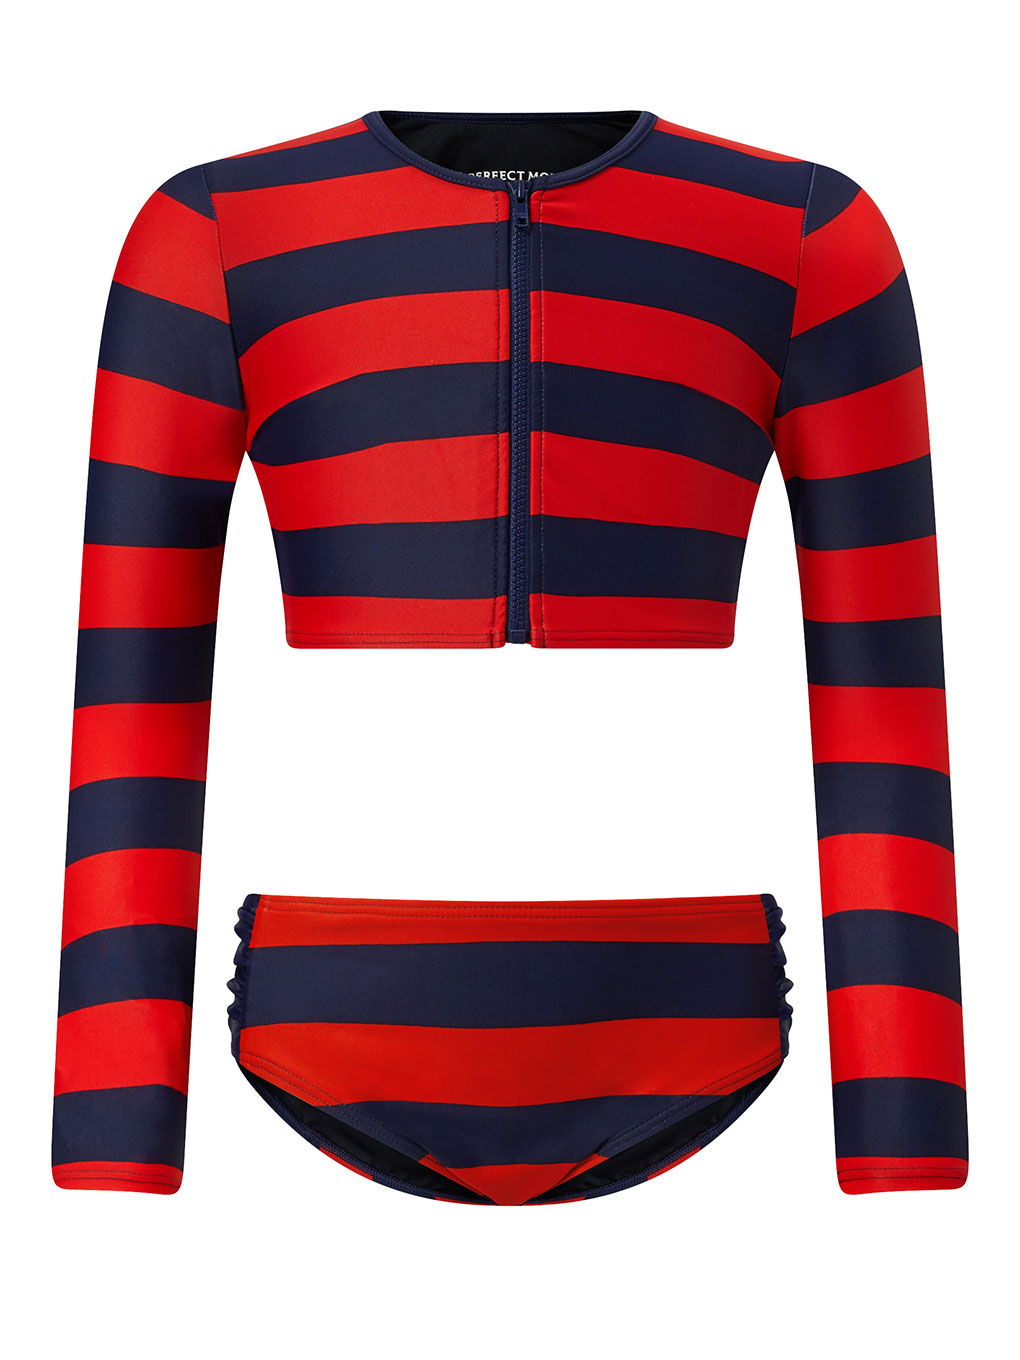 Perfect Moment Striped Rash Guard Y12 In Navy-red-stripe